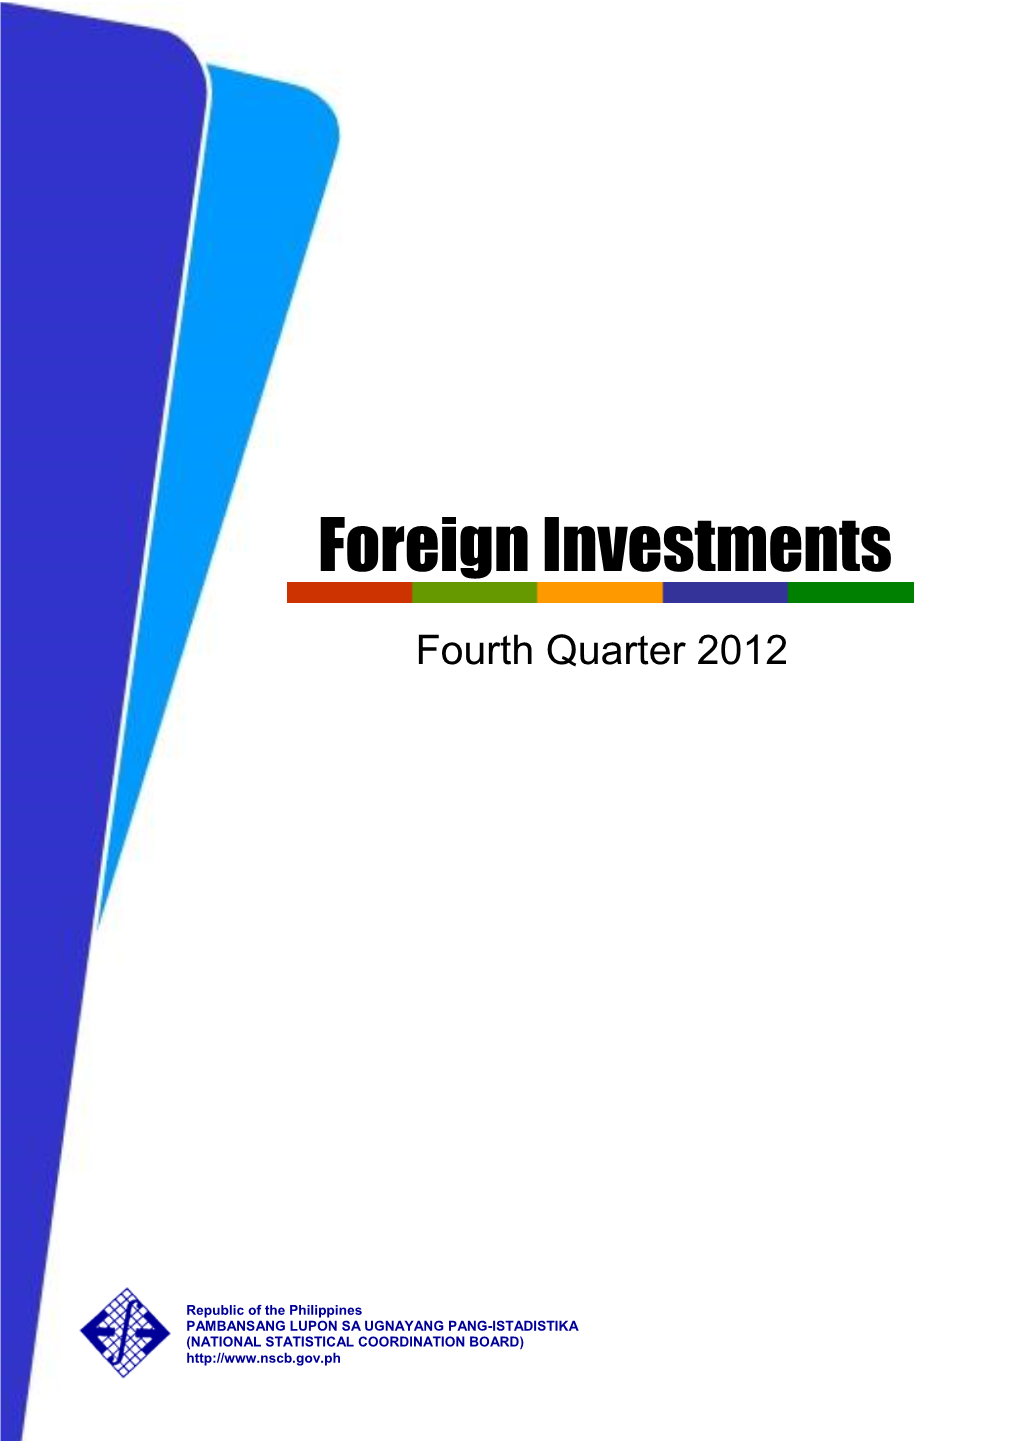 Foreign Investments